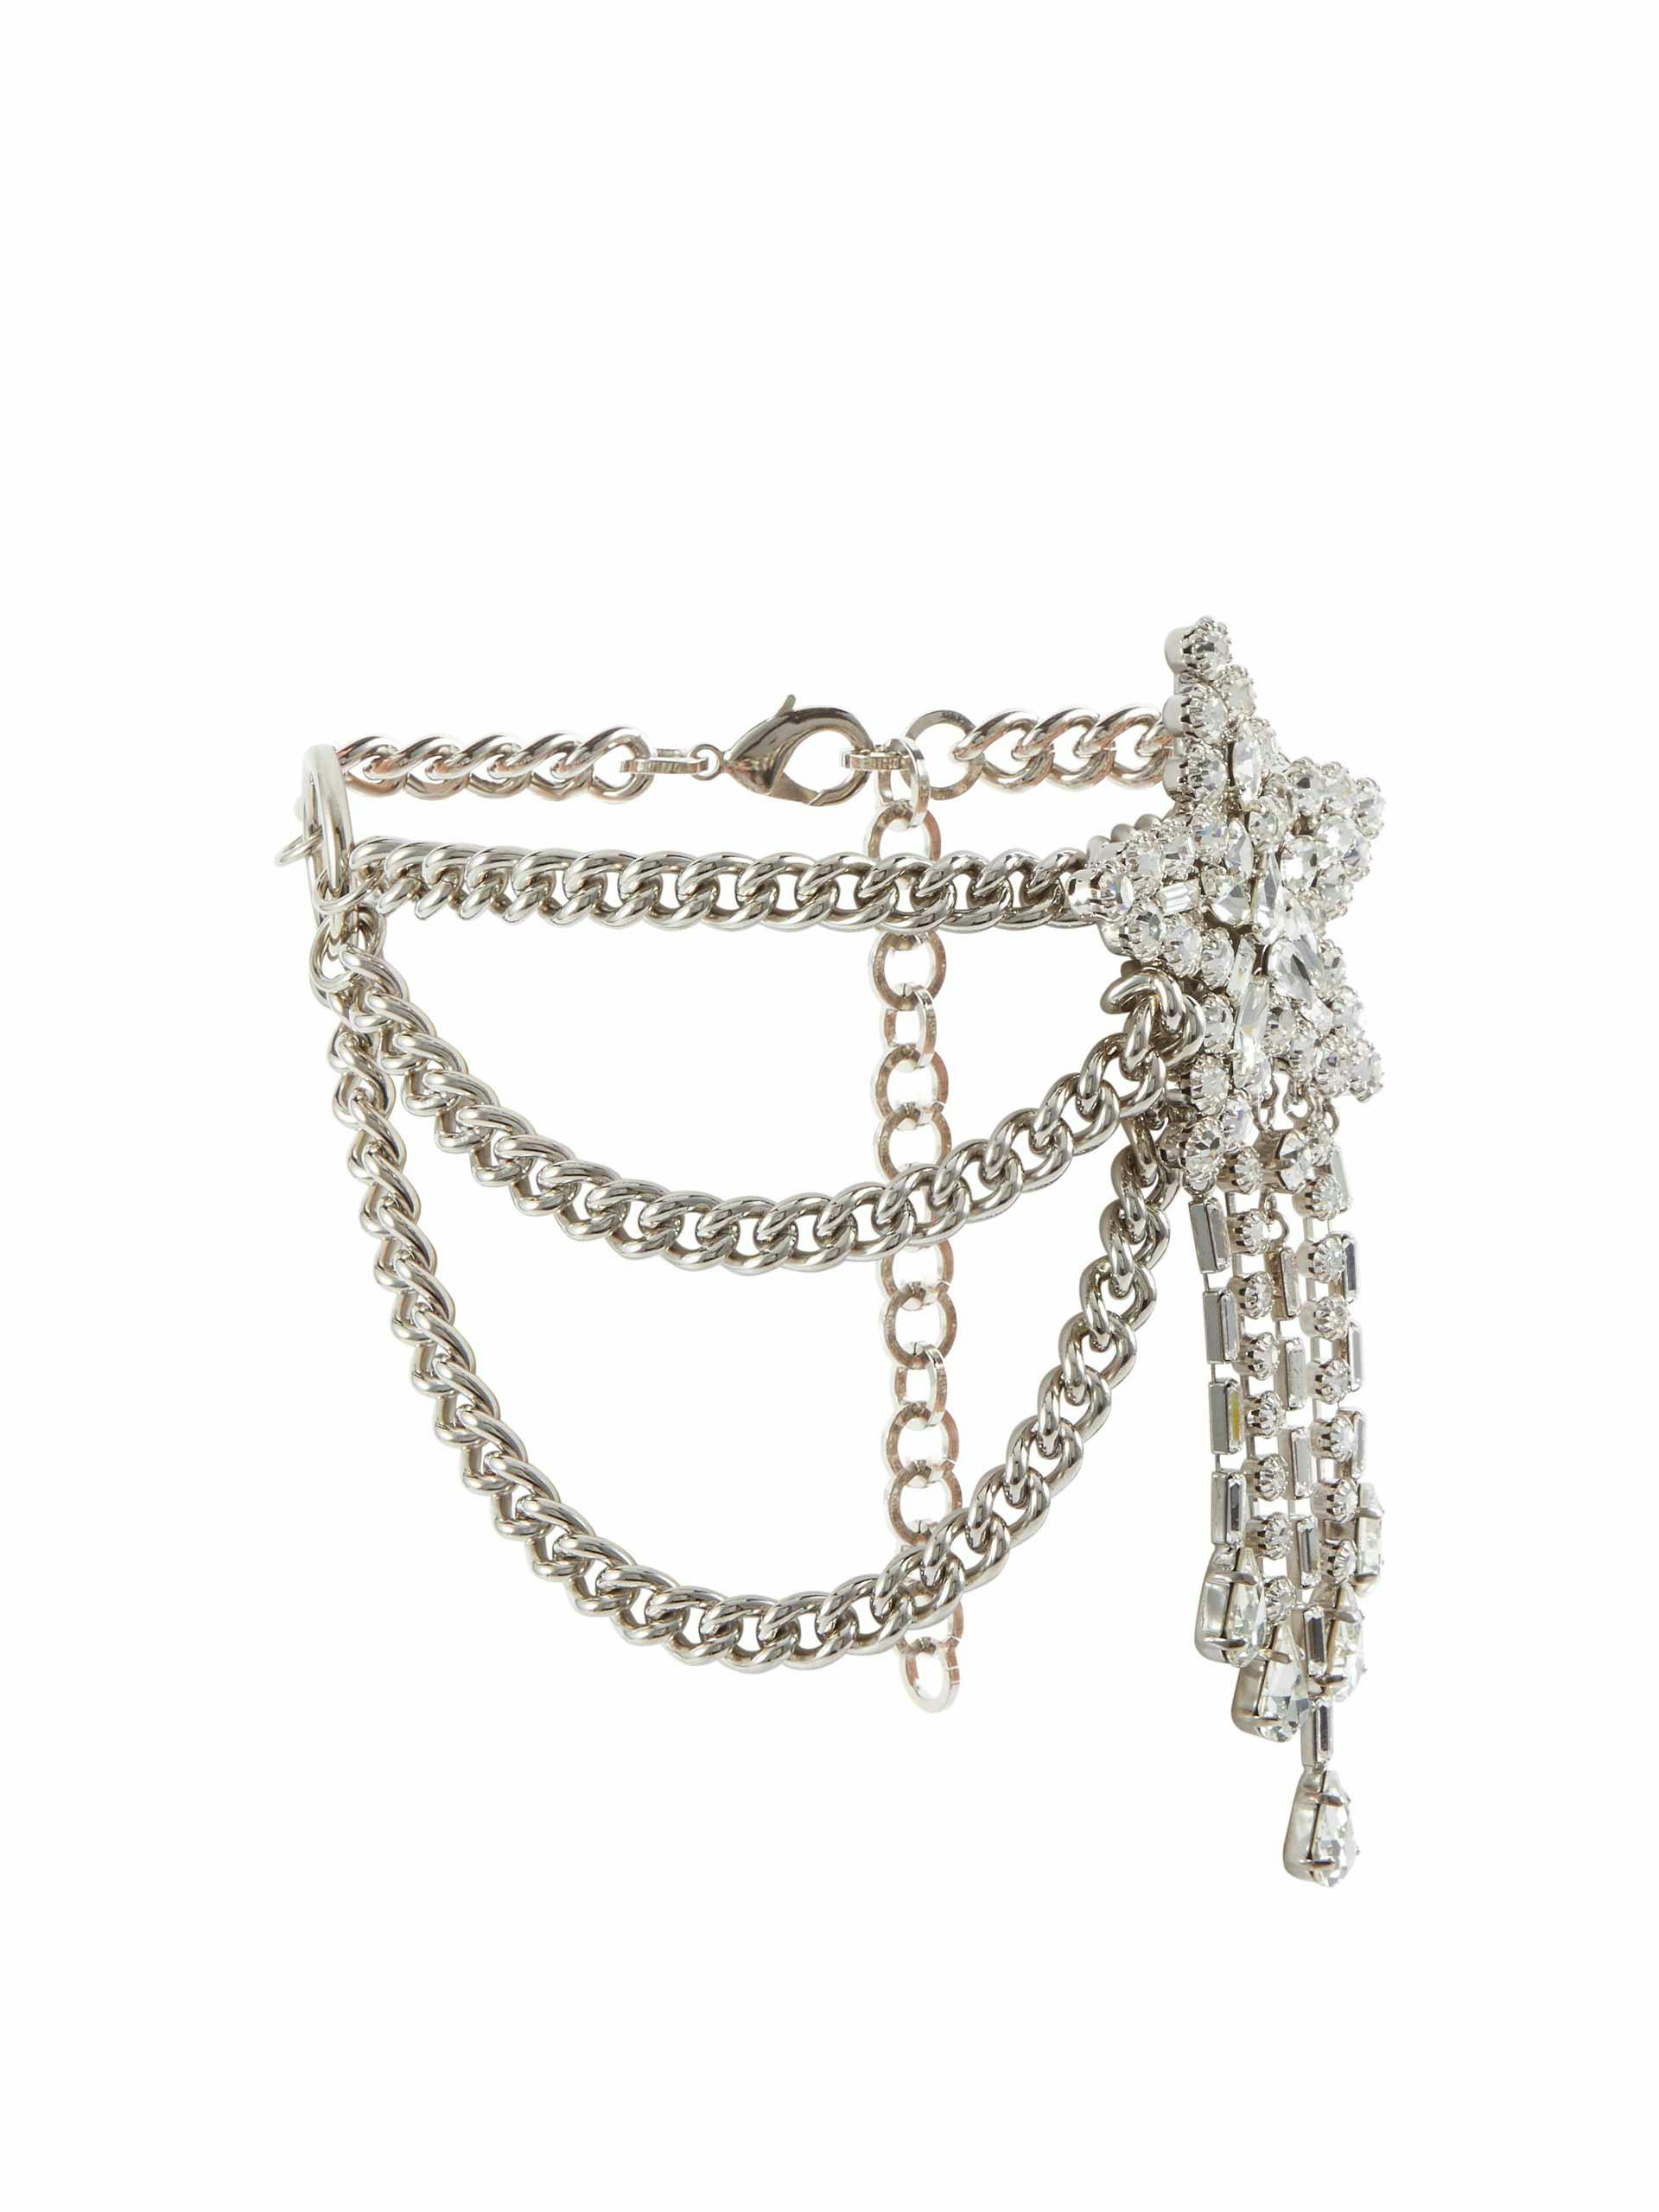 Choker with crystal embellishment